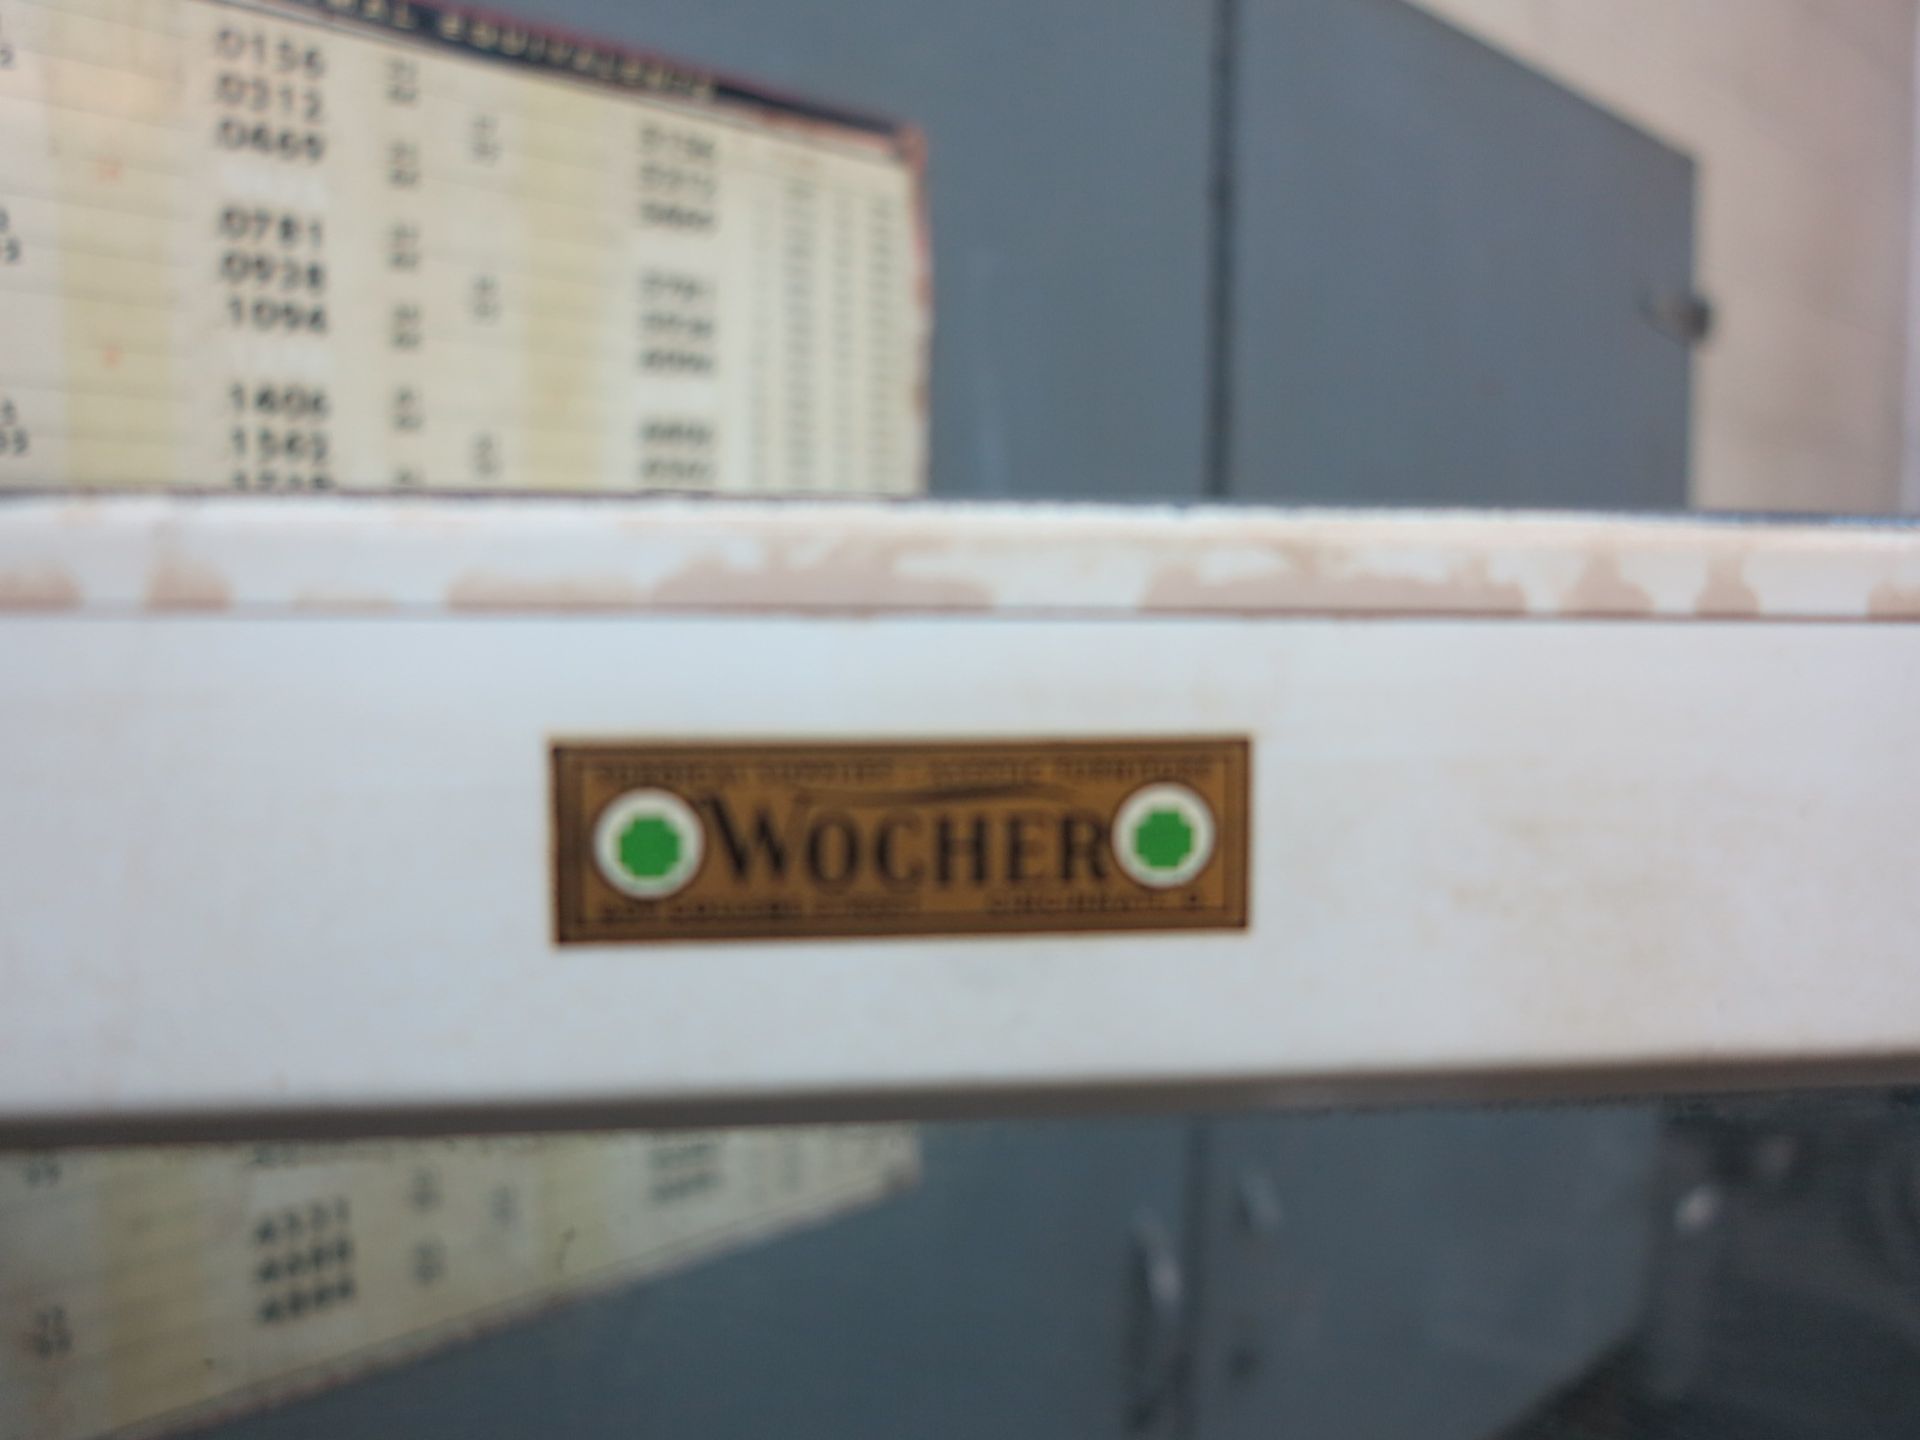 WOCHER GLASS DOORED MEDICAL CABINET, CONTENTS NOT INCLUDED - Image 3 of 3